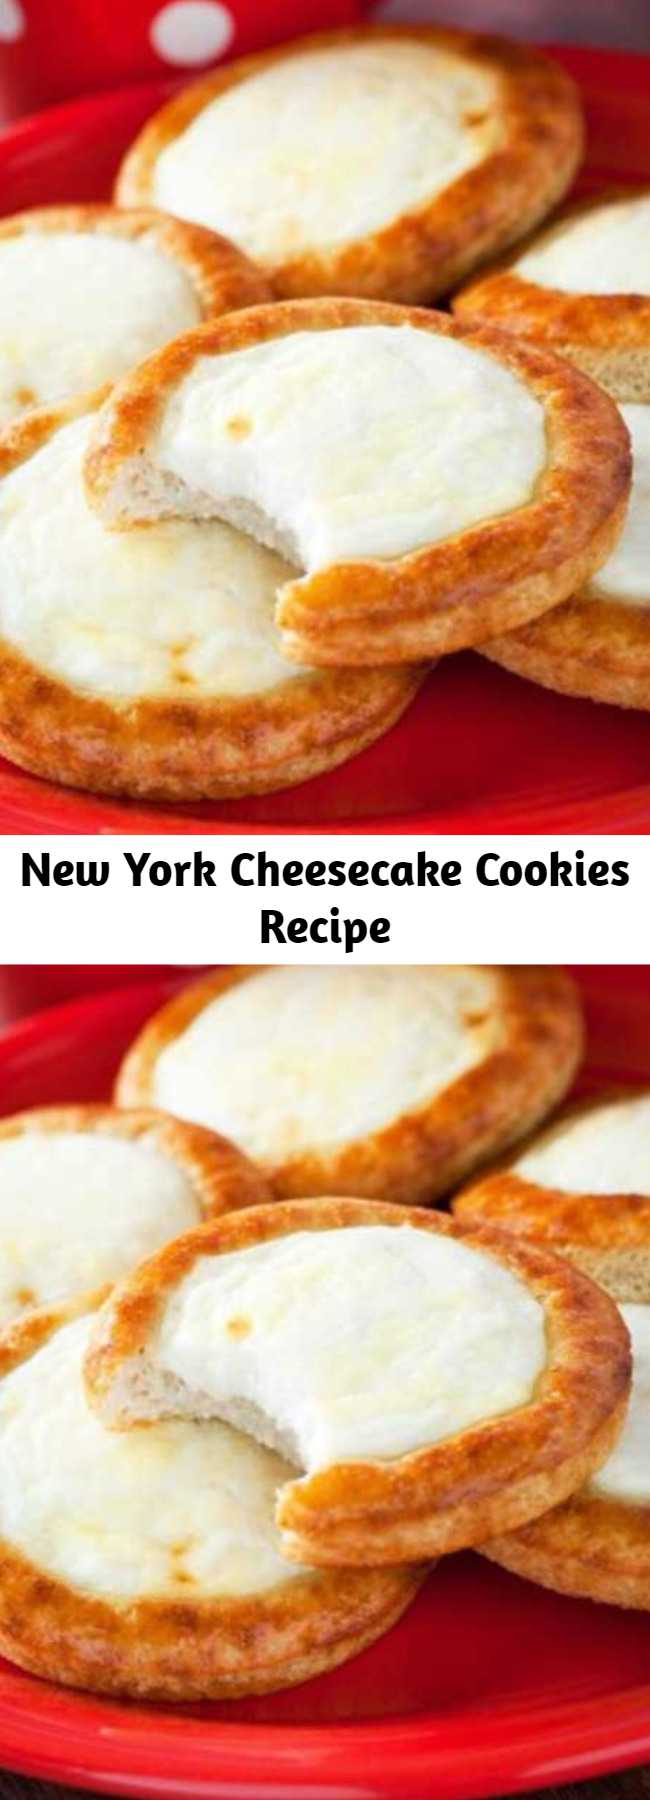 New York Cheesecake Cookies Recipe - It's like Christmas came early! If you had asked me what could make a cheesecake I would have smiled dreamily and said "Nothing." But then, cheesecake cookies happened.